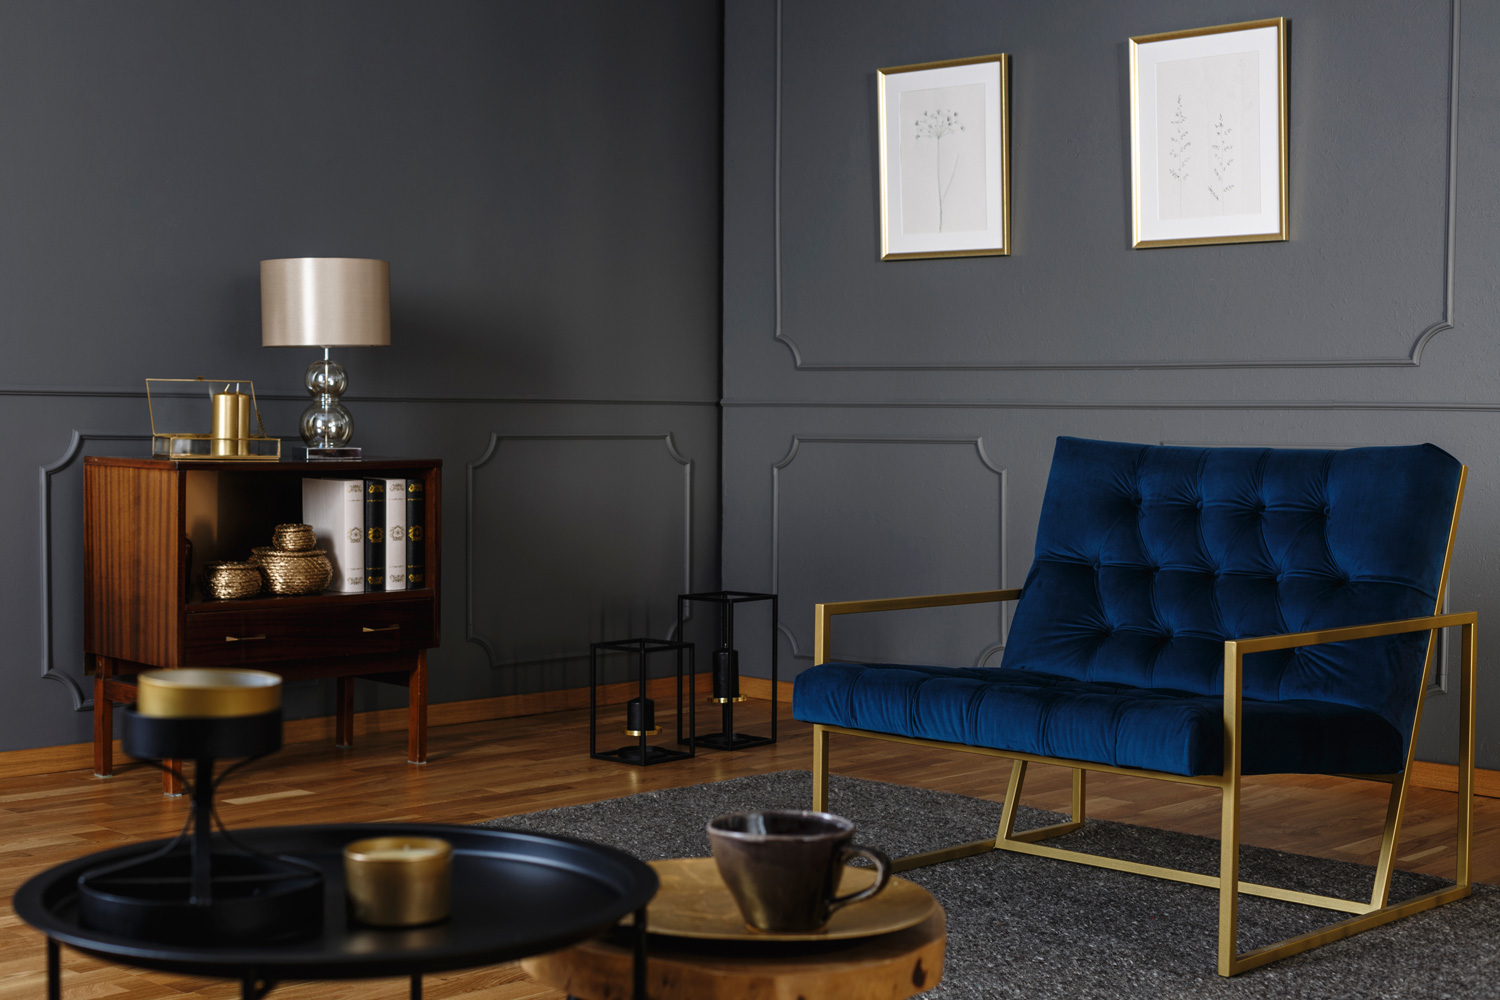 Real photo of a navy blue armchair with a golden frame standing against dark wall with molding in living room interior with gray rug on wooden floor